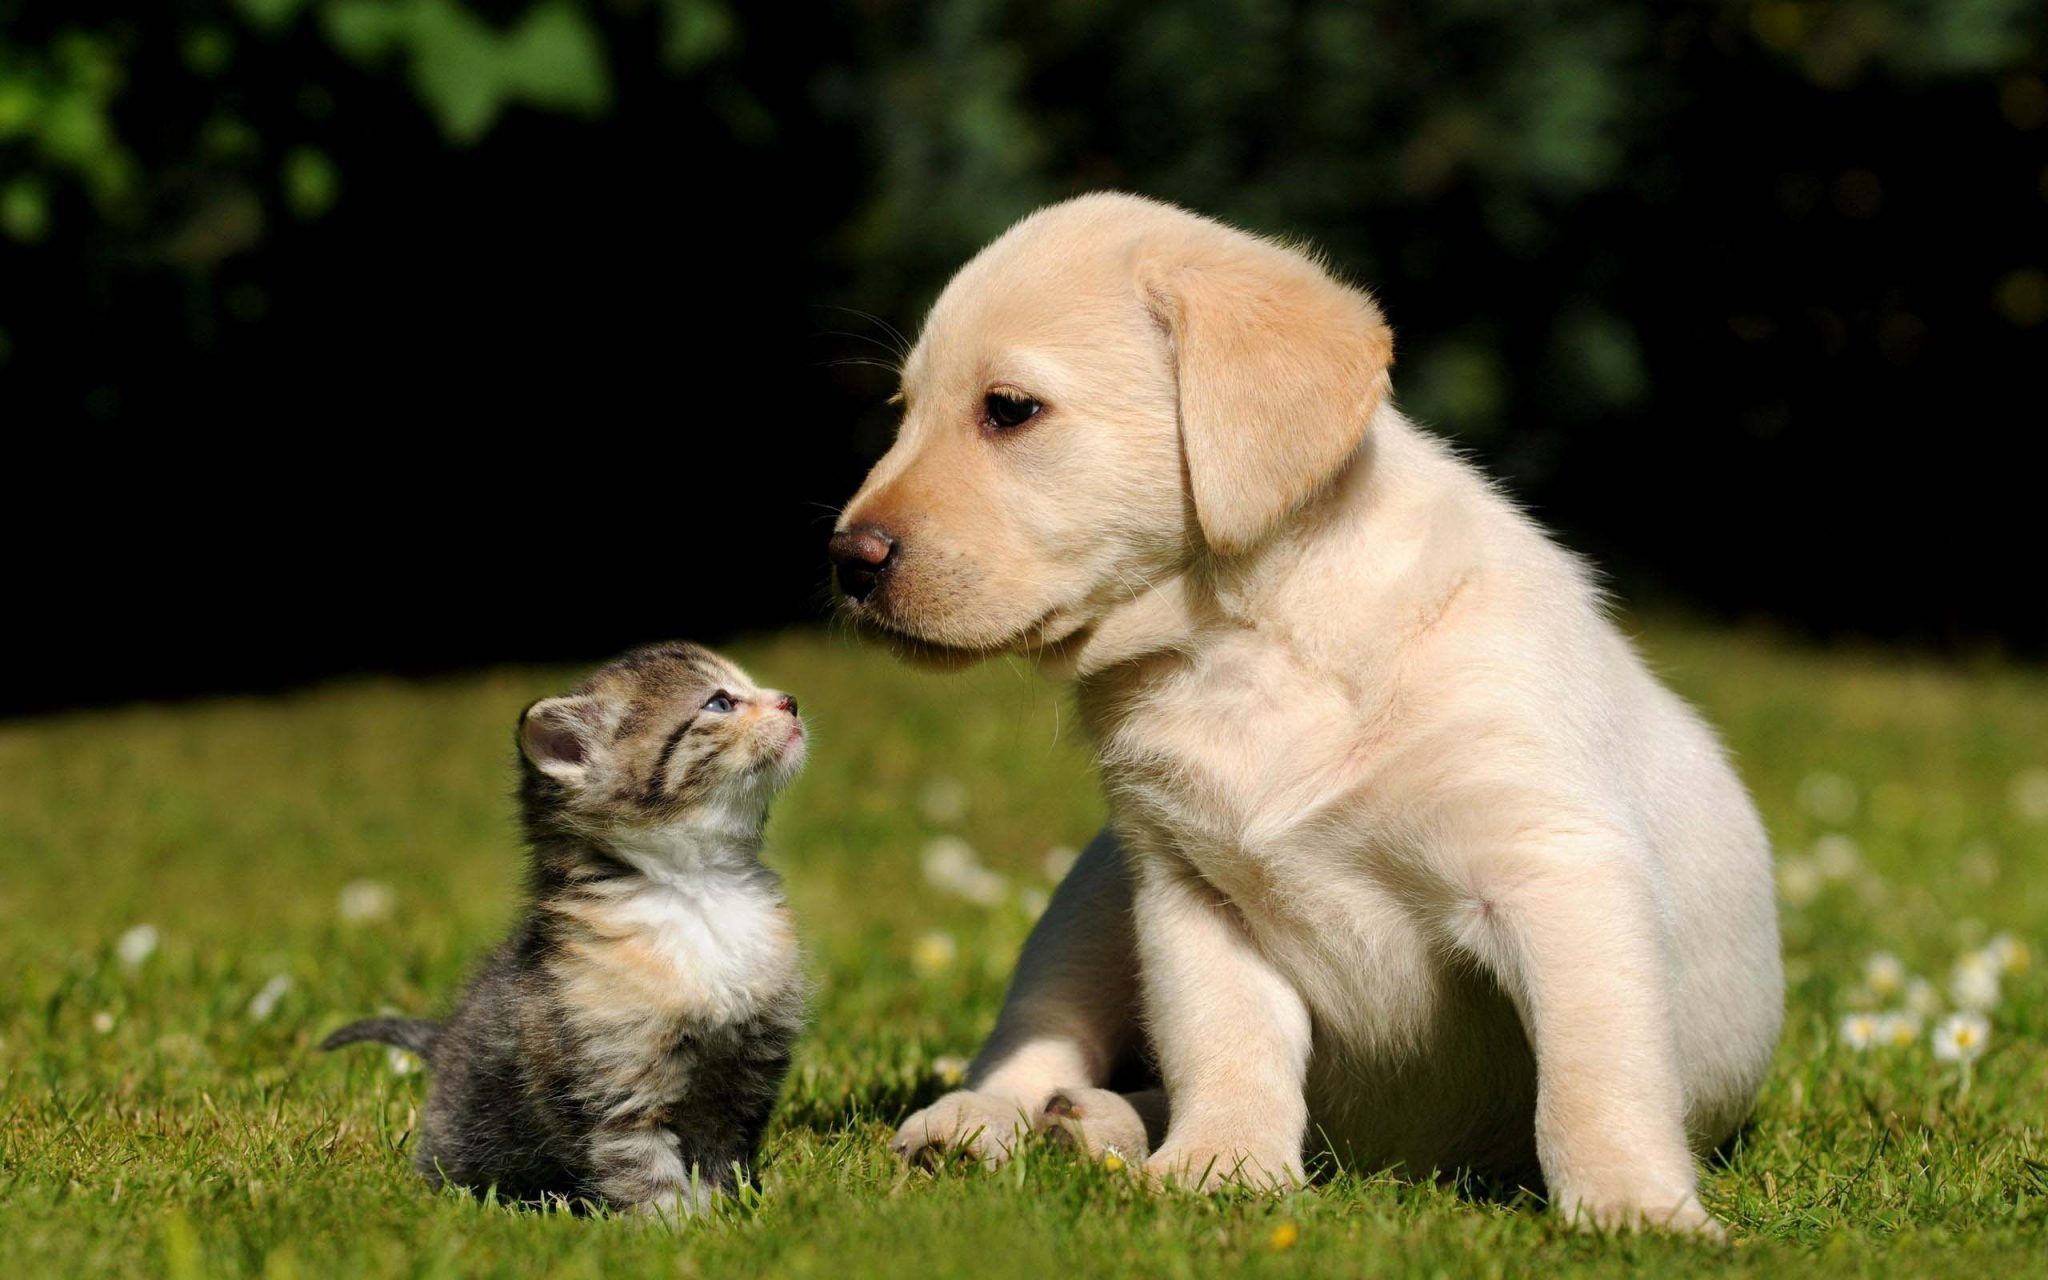 Baby Cats and Dogs Wallpaper Free Baby Cats and Dogs Background